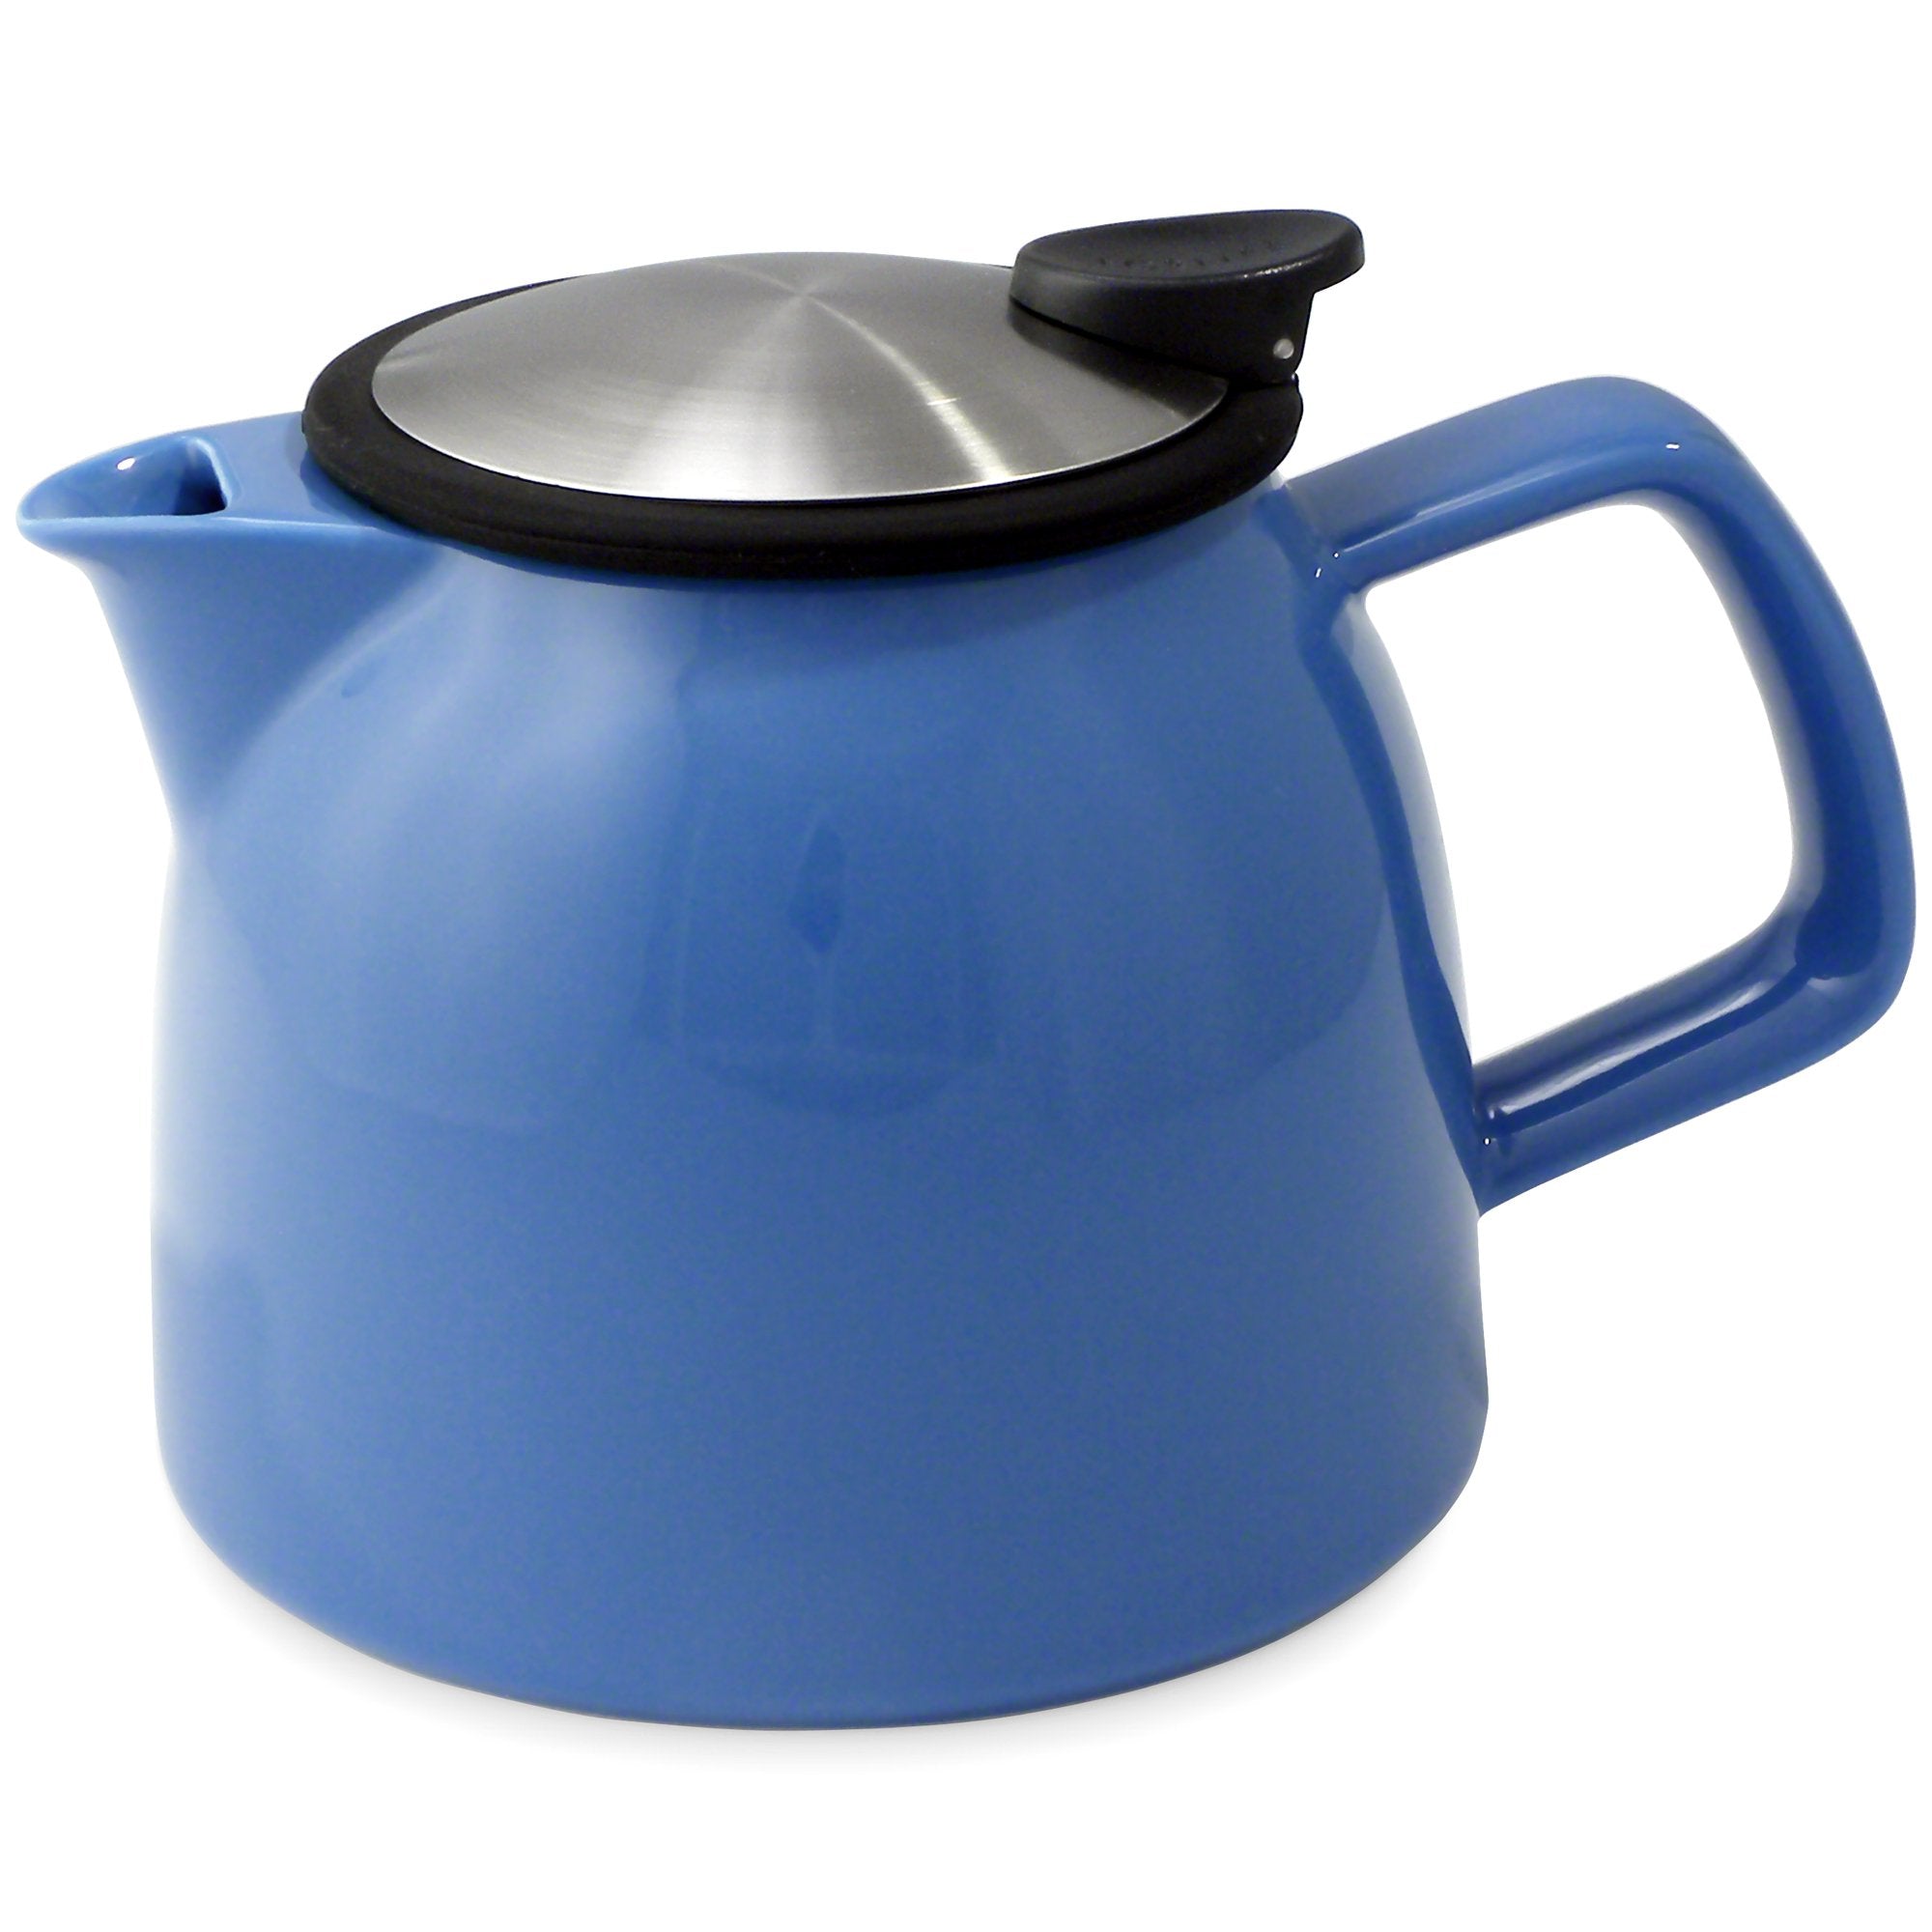 Tealula 26 oz bell-shaped blue teapot with square handle and black and silver detachable push-on-lid